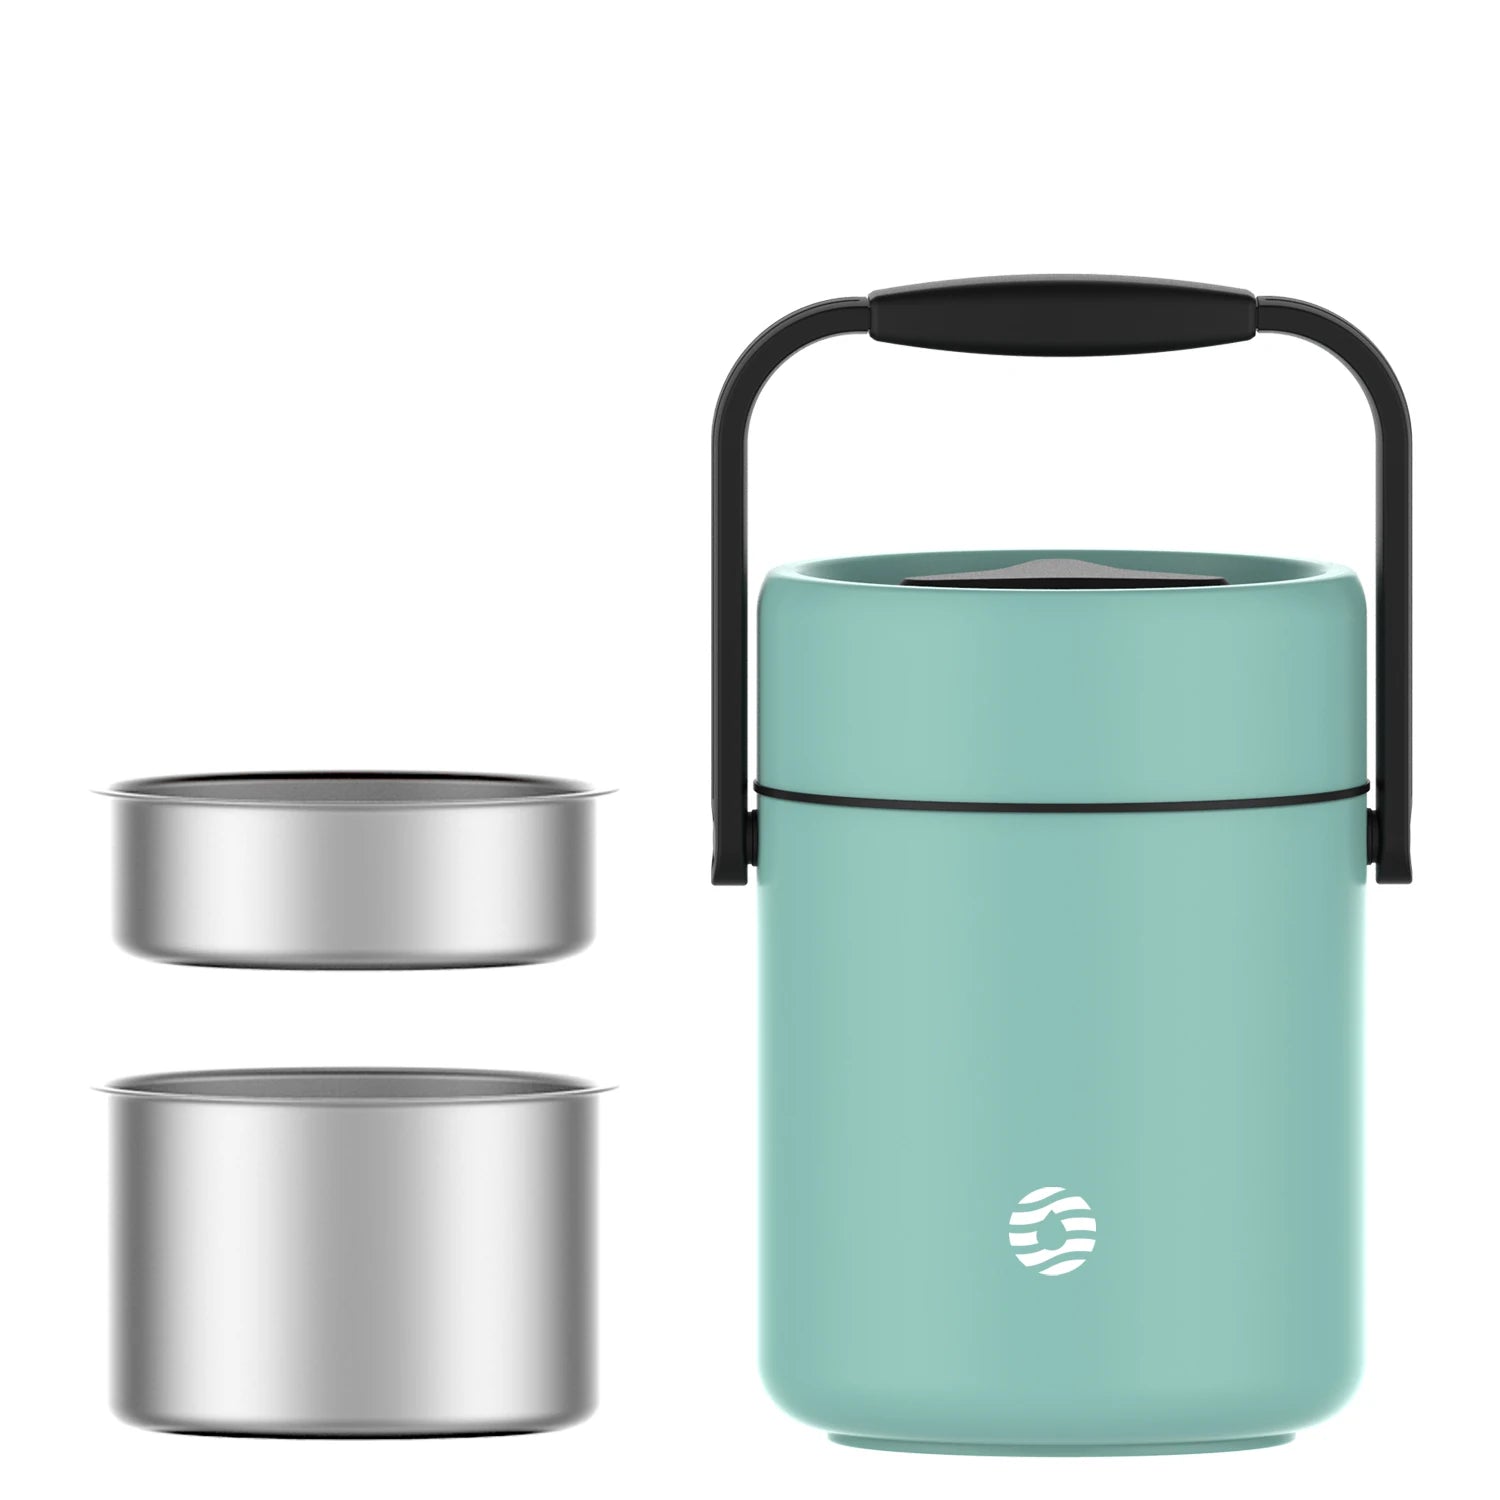 FEIJIAN-Stainless Steel Lunch Box, 3 Layers Food Jars, 1600ml, 54oz Green 3 1600ml